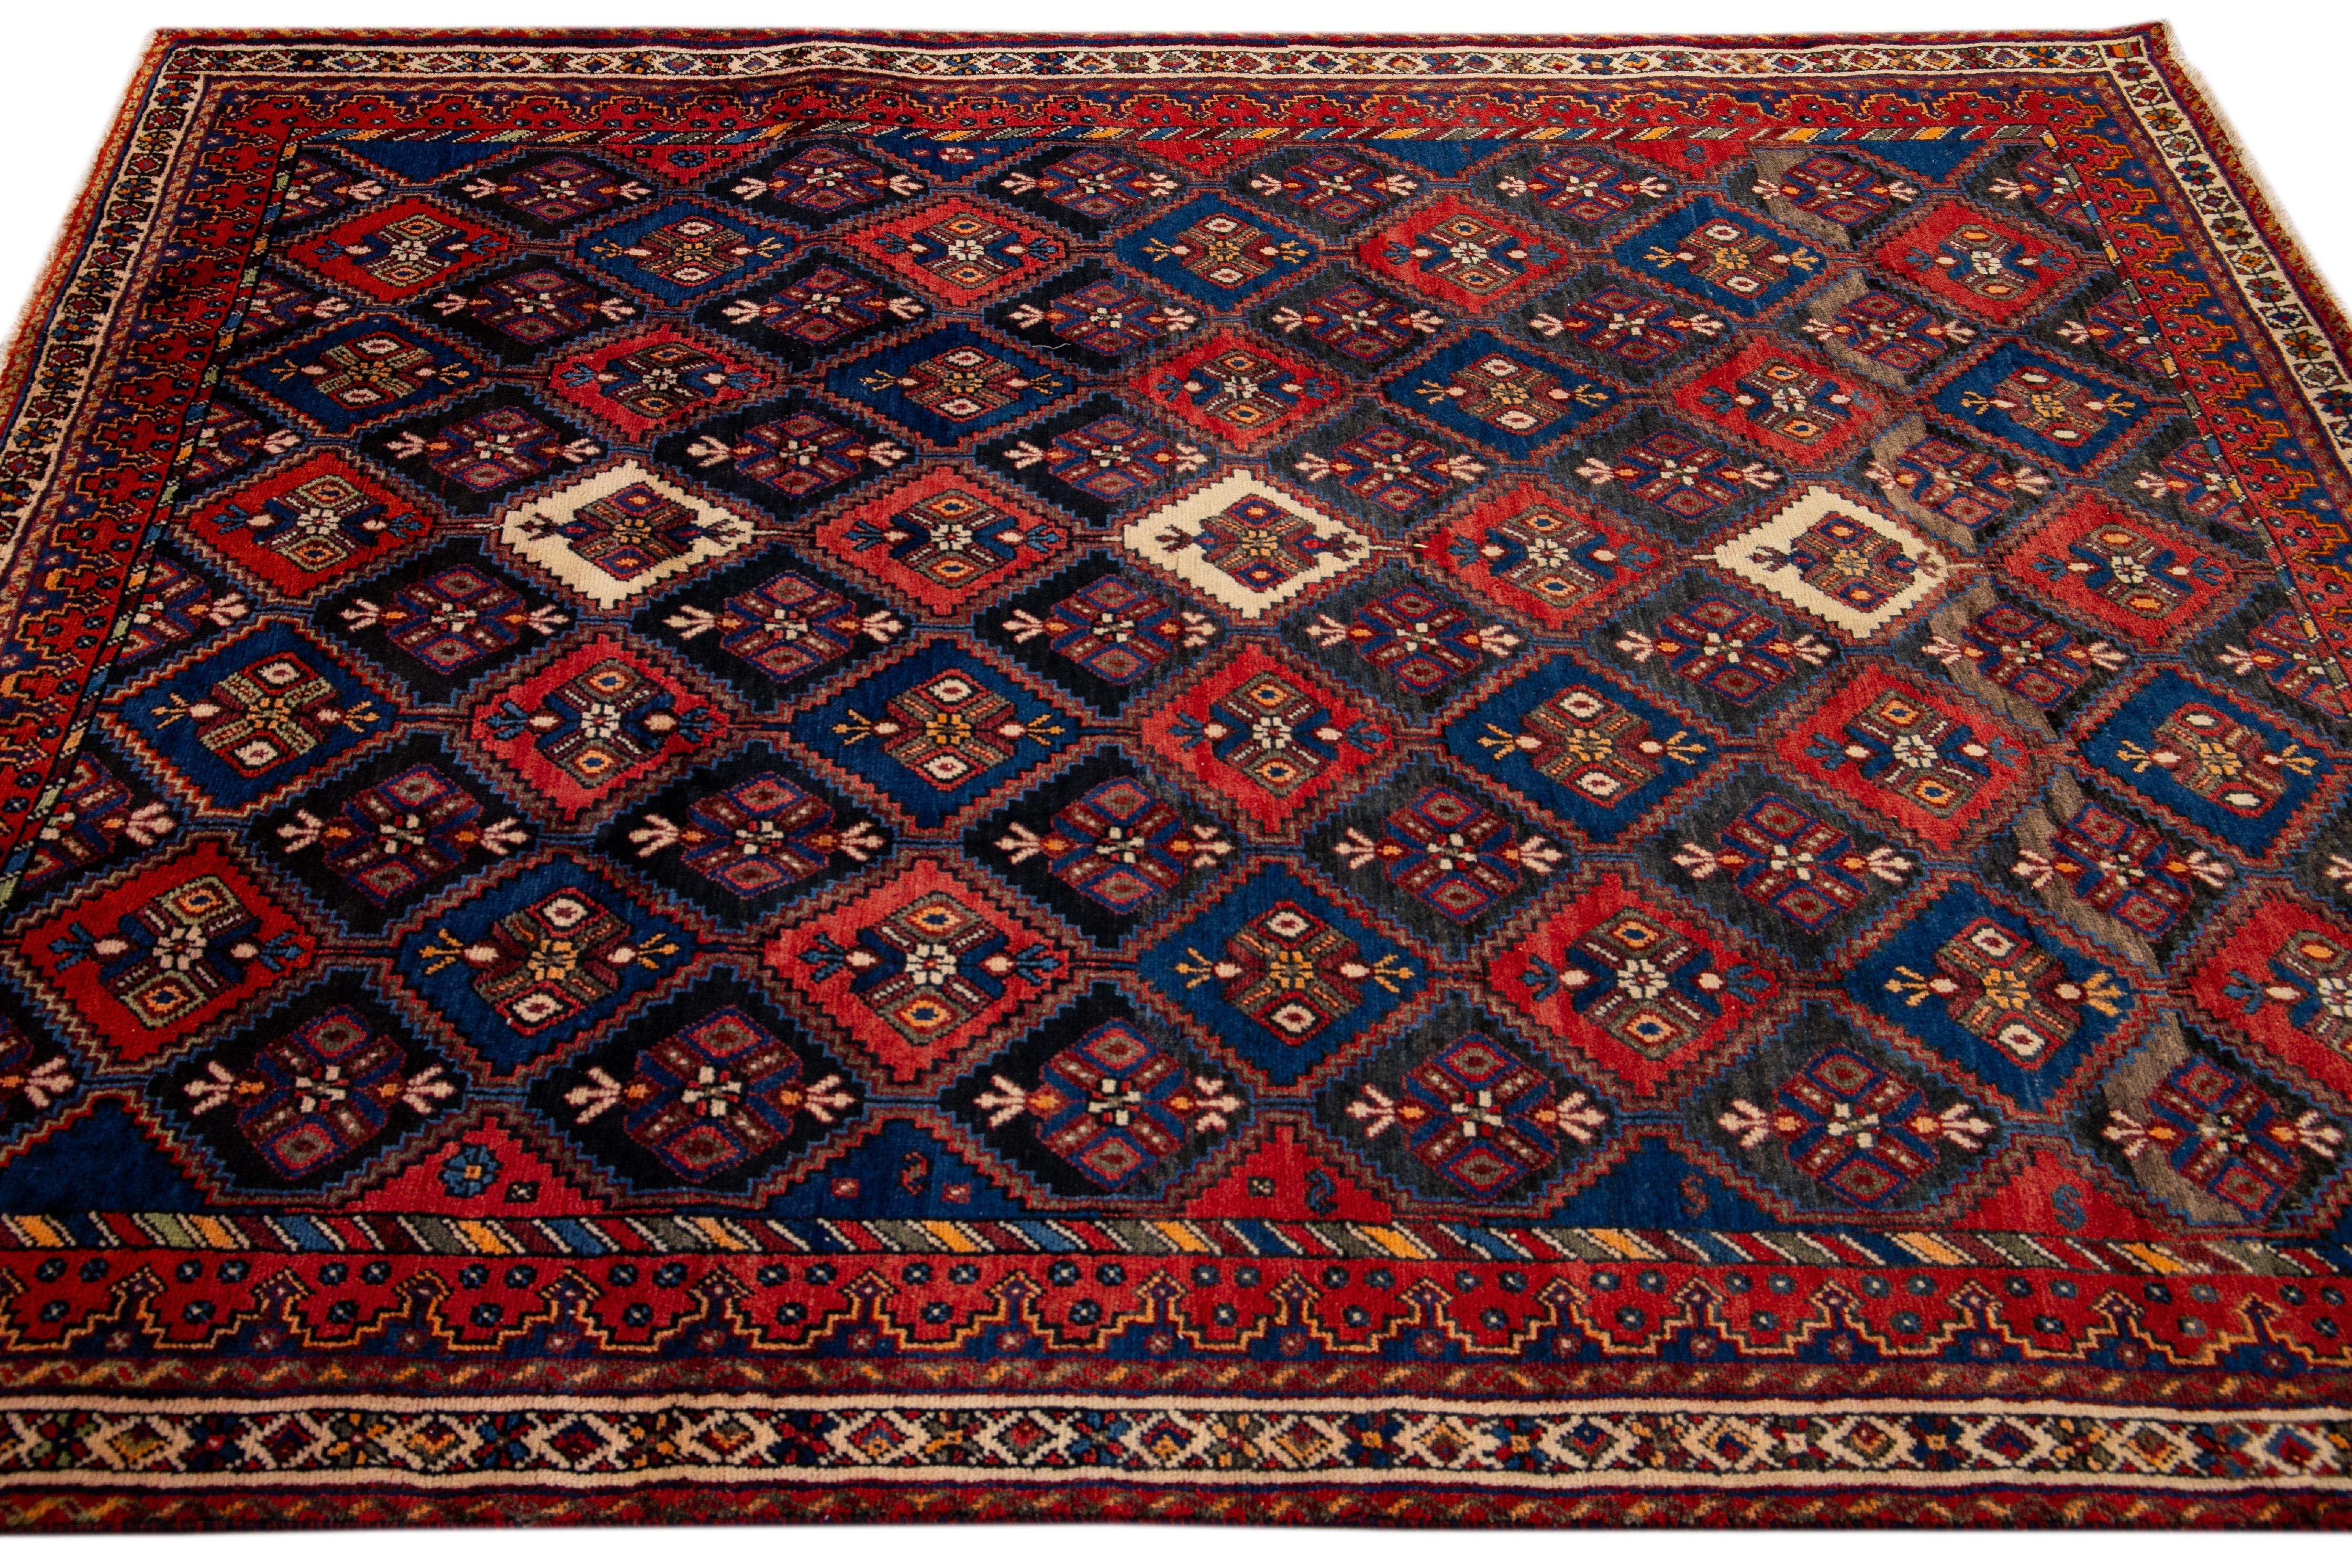 Vintage Blue and Red Persian Handmade Geometric Pattern Wool Rug In Good Condition For Sale In Norwalk, CT